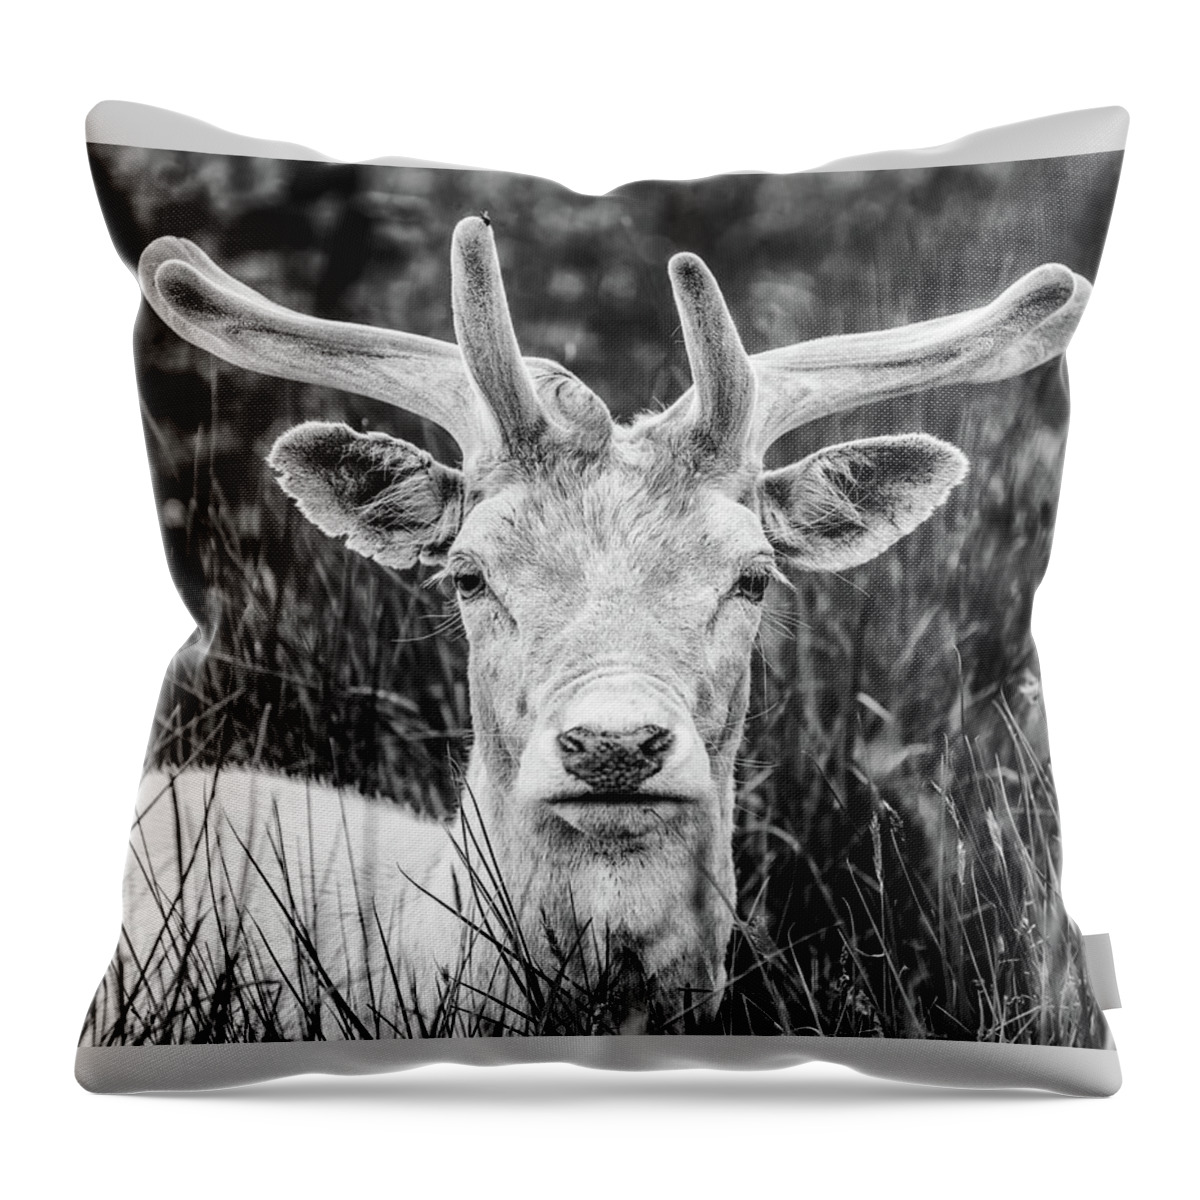 Spring Throw Pillow featuring the photograph Spring Deer by Nick Bywater